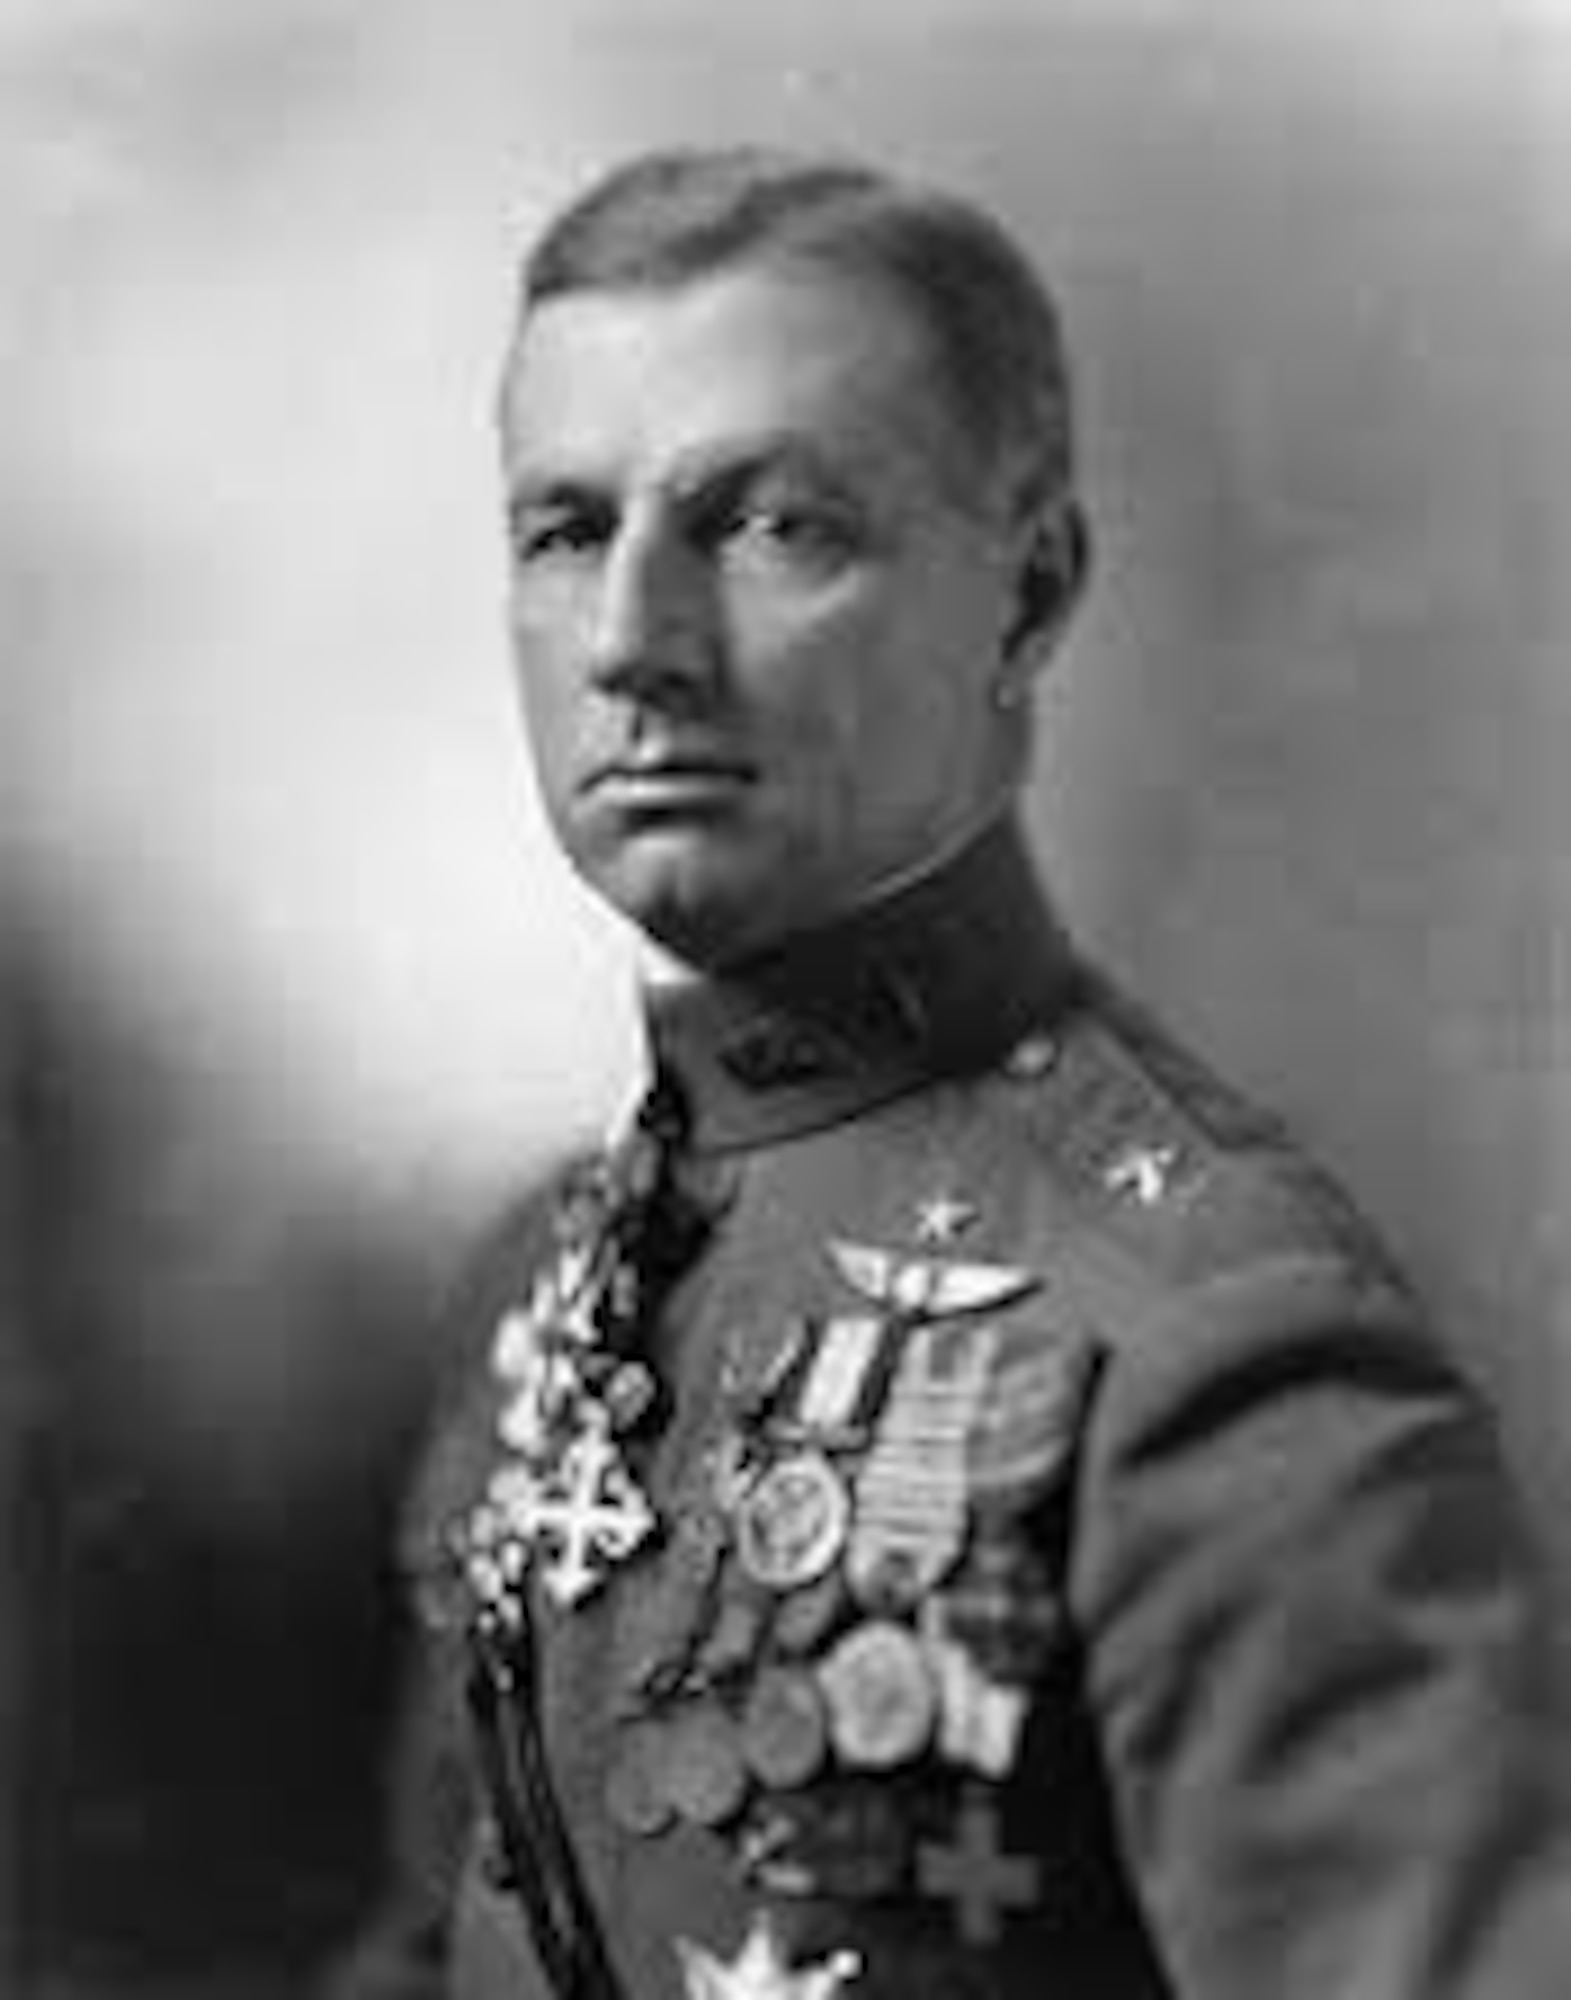 Brig. Gen. William “Billy” Mitchell in the early 1920s. Mitchell was a vocal advocate for American airpower and the considered “father of the U.S. Air Force.” He predicted the rise of naval airpower and the vulnerability of warships to air attack. (Courtesy photo)